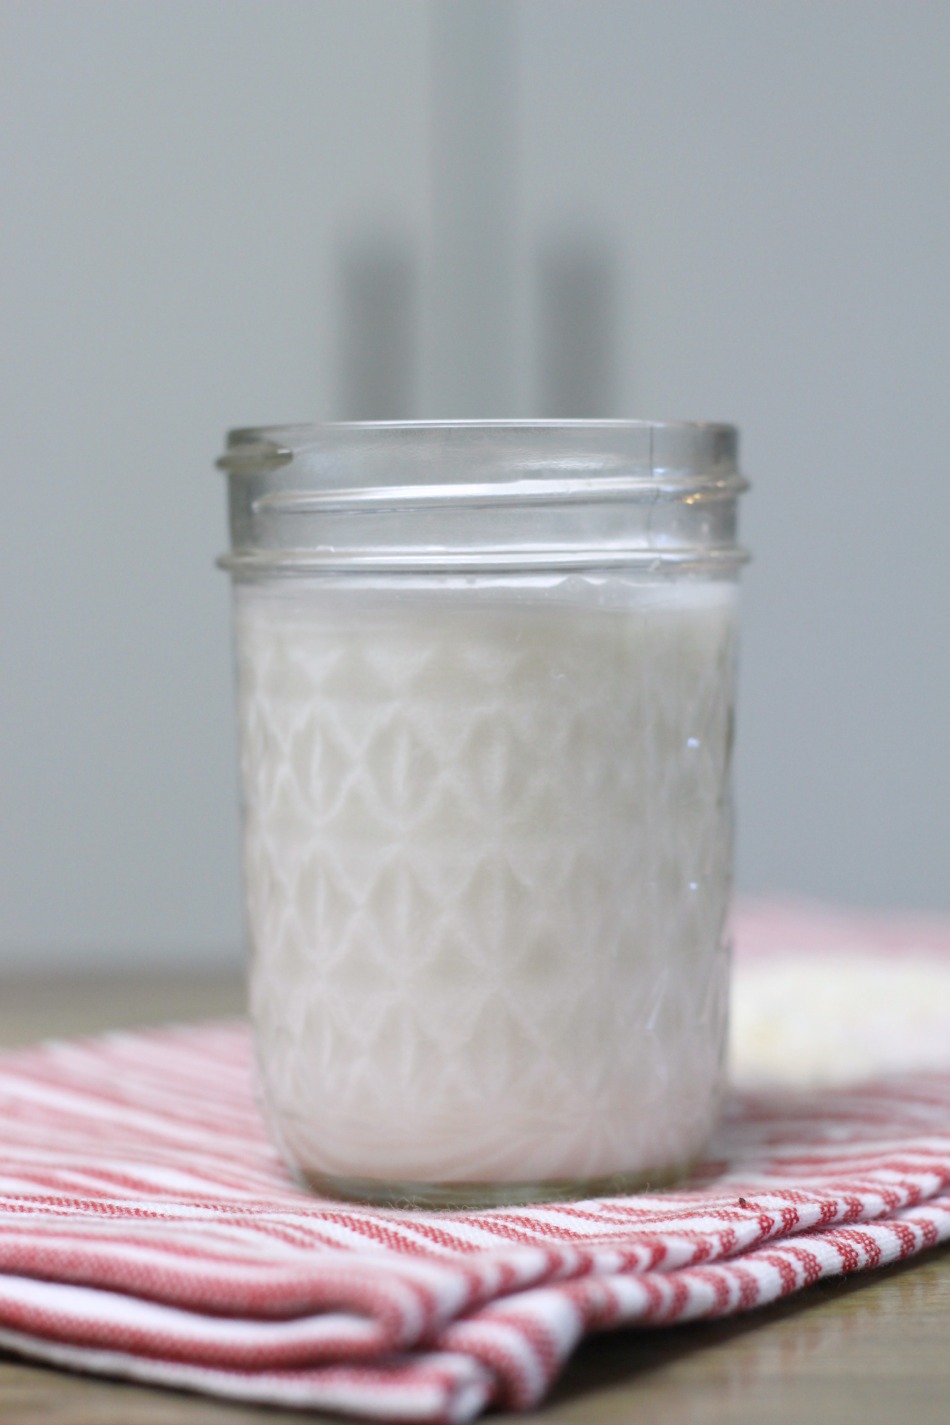 How To Make Homemade Coconut Milk | Growing Up Herbal | Homemade coconut milk is easy to make and so healthy for you. Learn why you should drink it and how to make it at home right here!